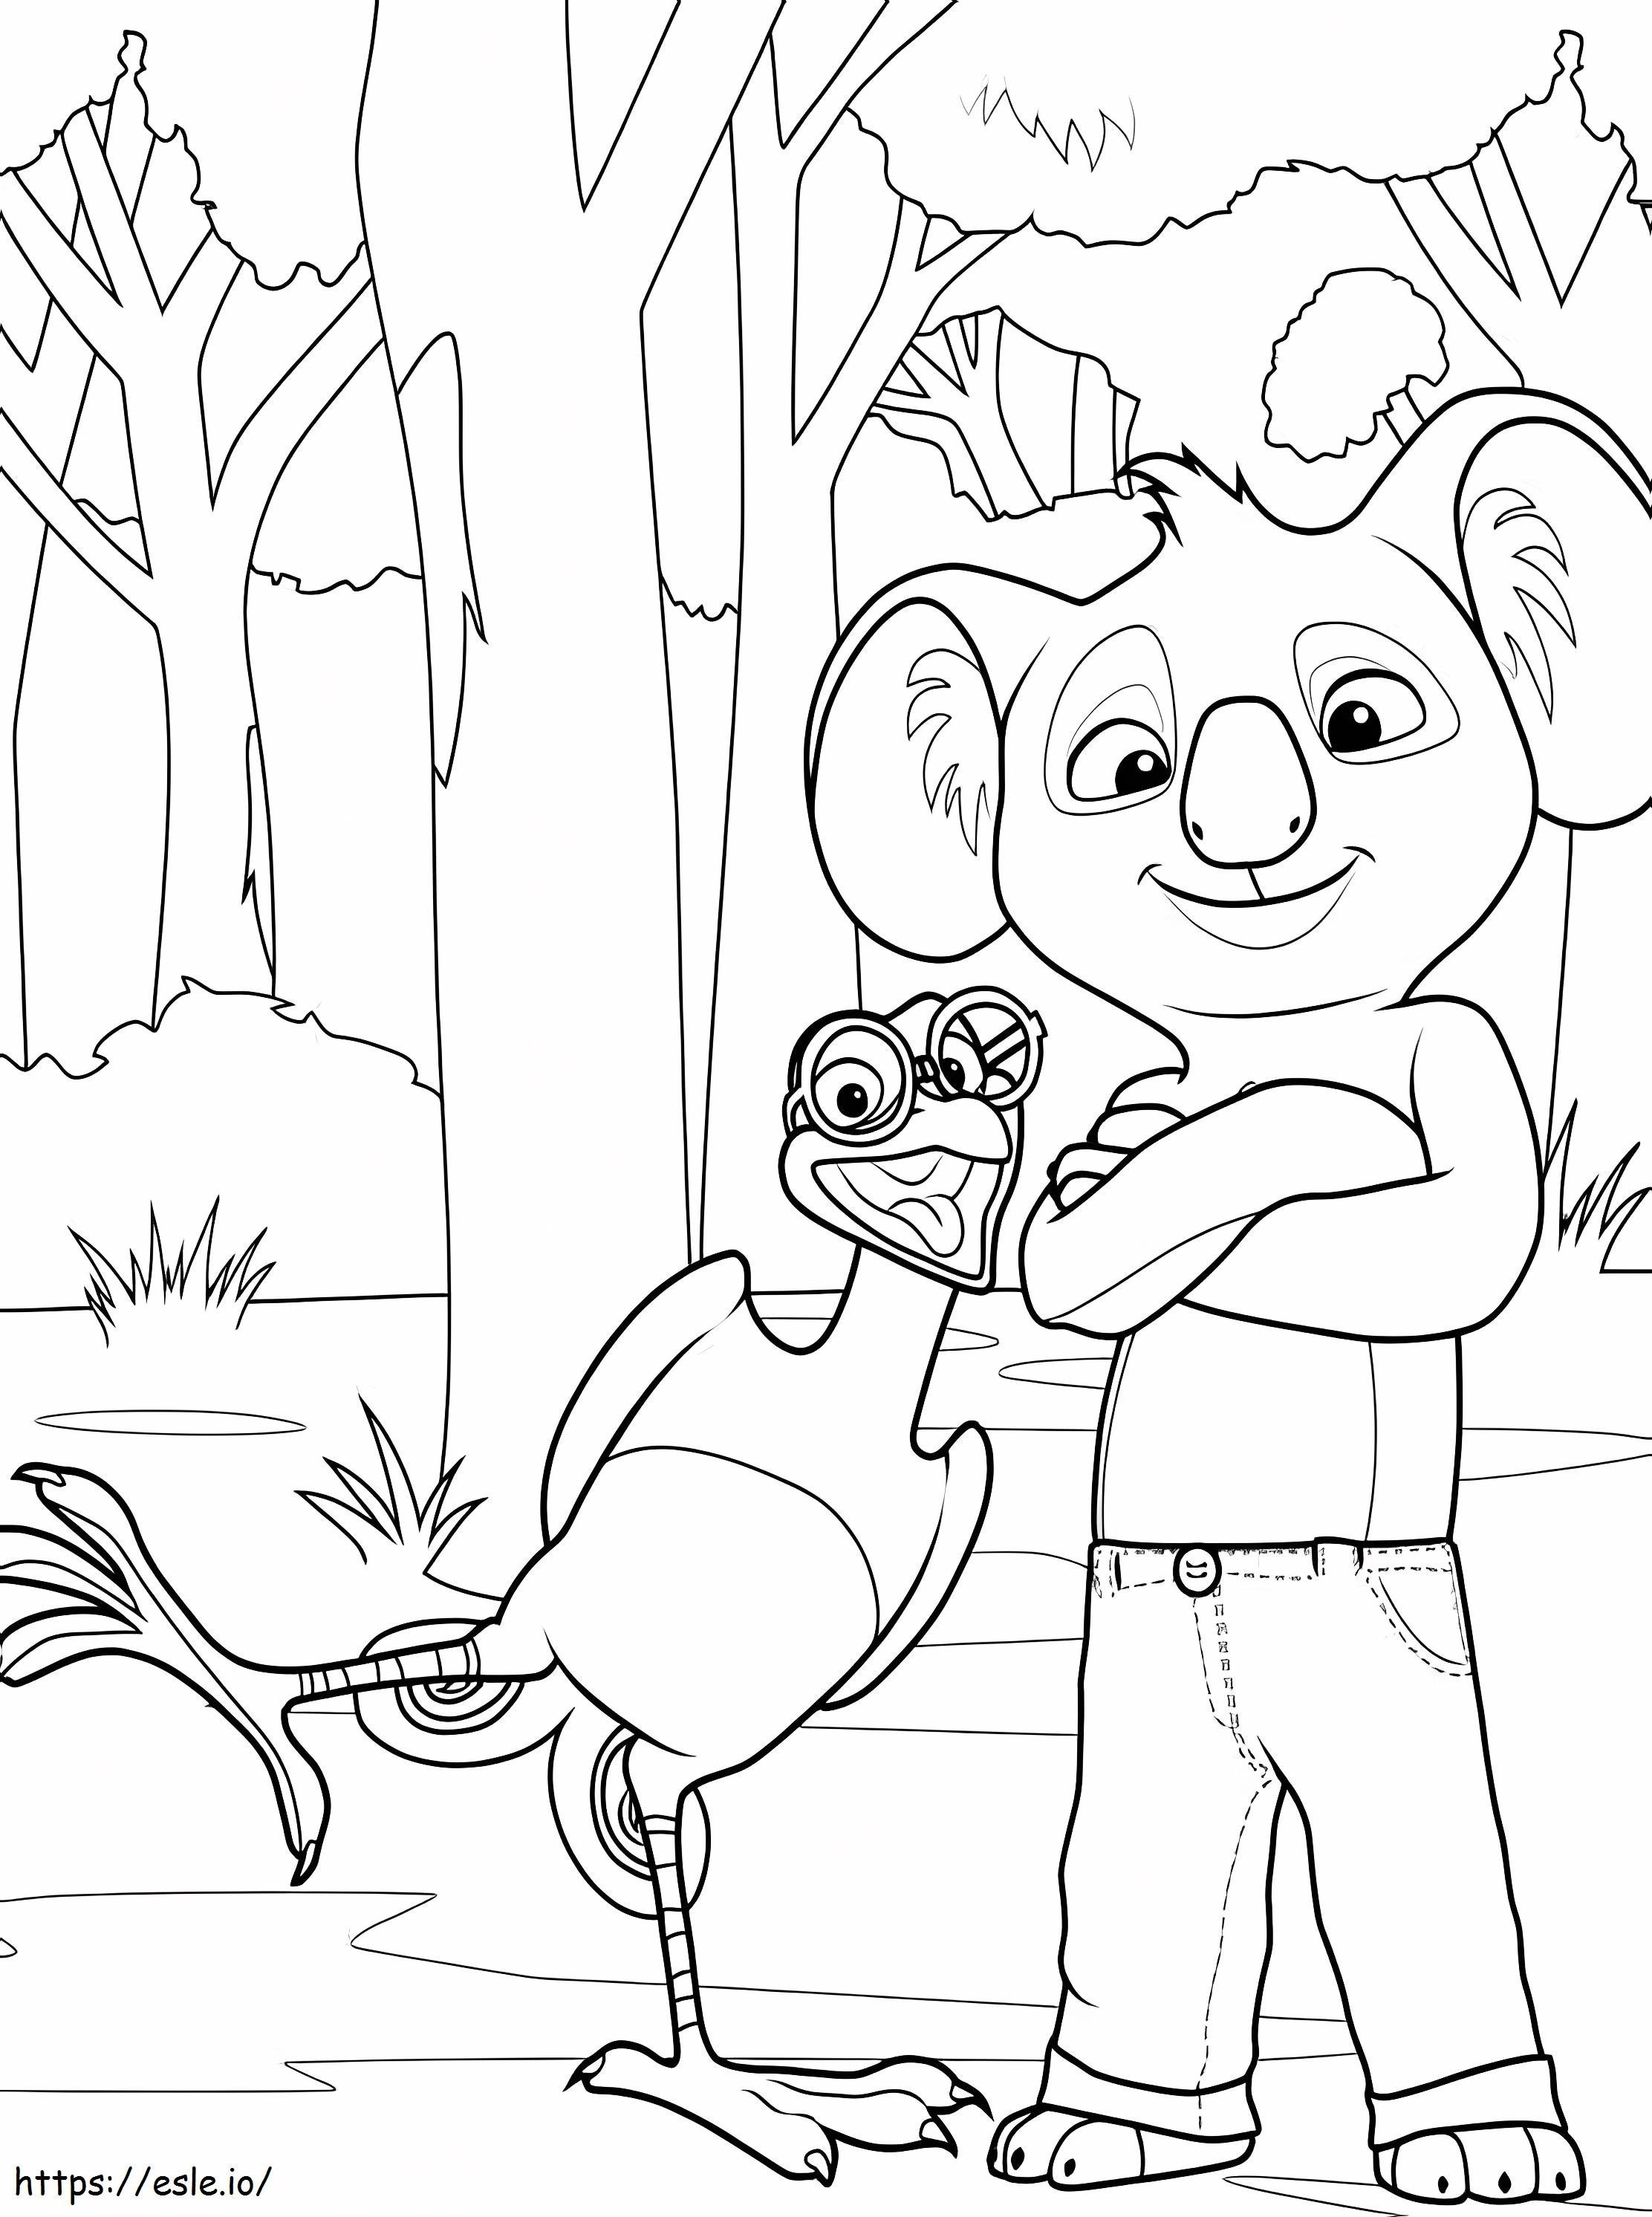 Robert And Blinky Bill coloring page